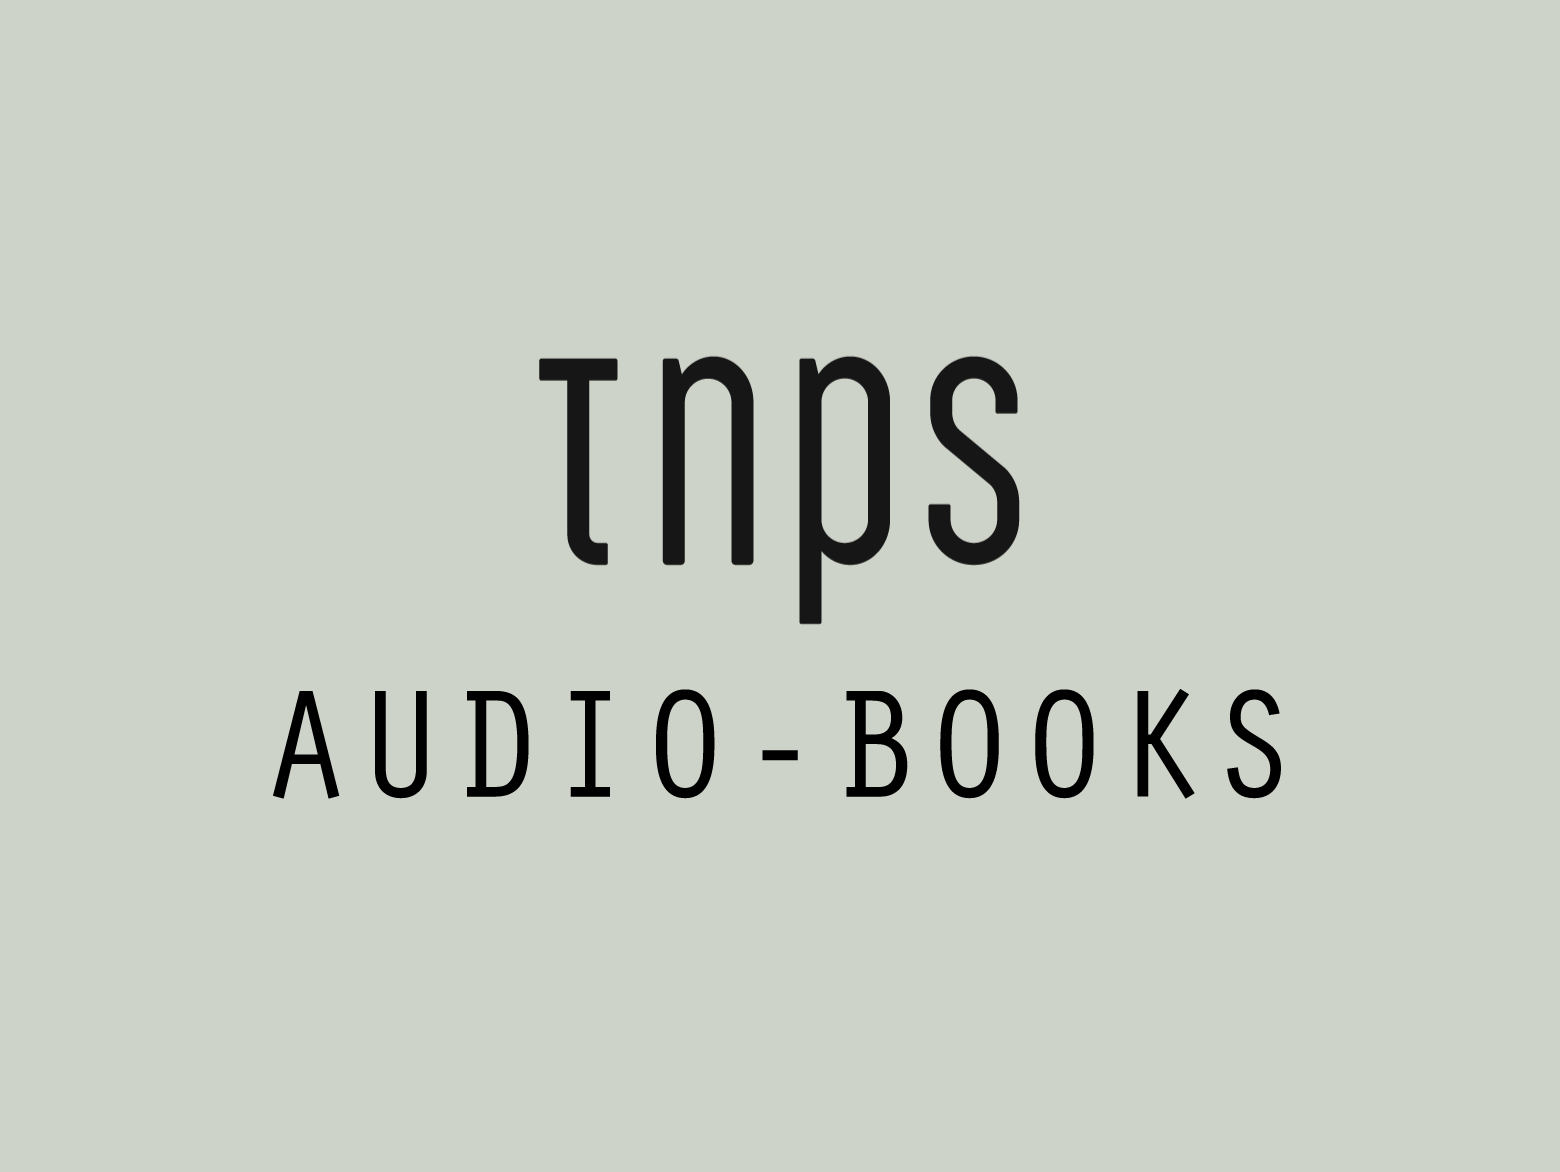 Audio Publishers Association says 2017 US audiobook market worth $2.5 billion – more than double Data Guy’s BookStat valuation. Who are we to believe?